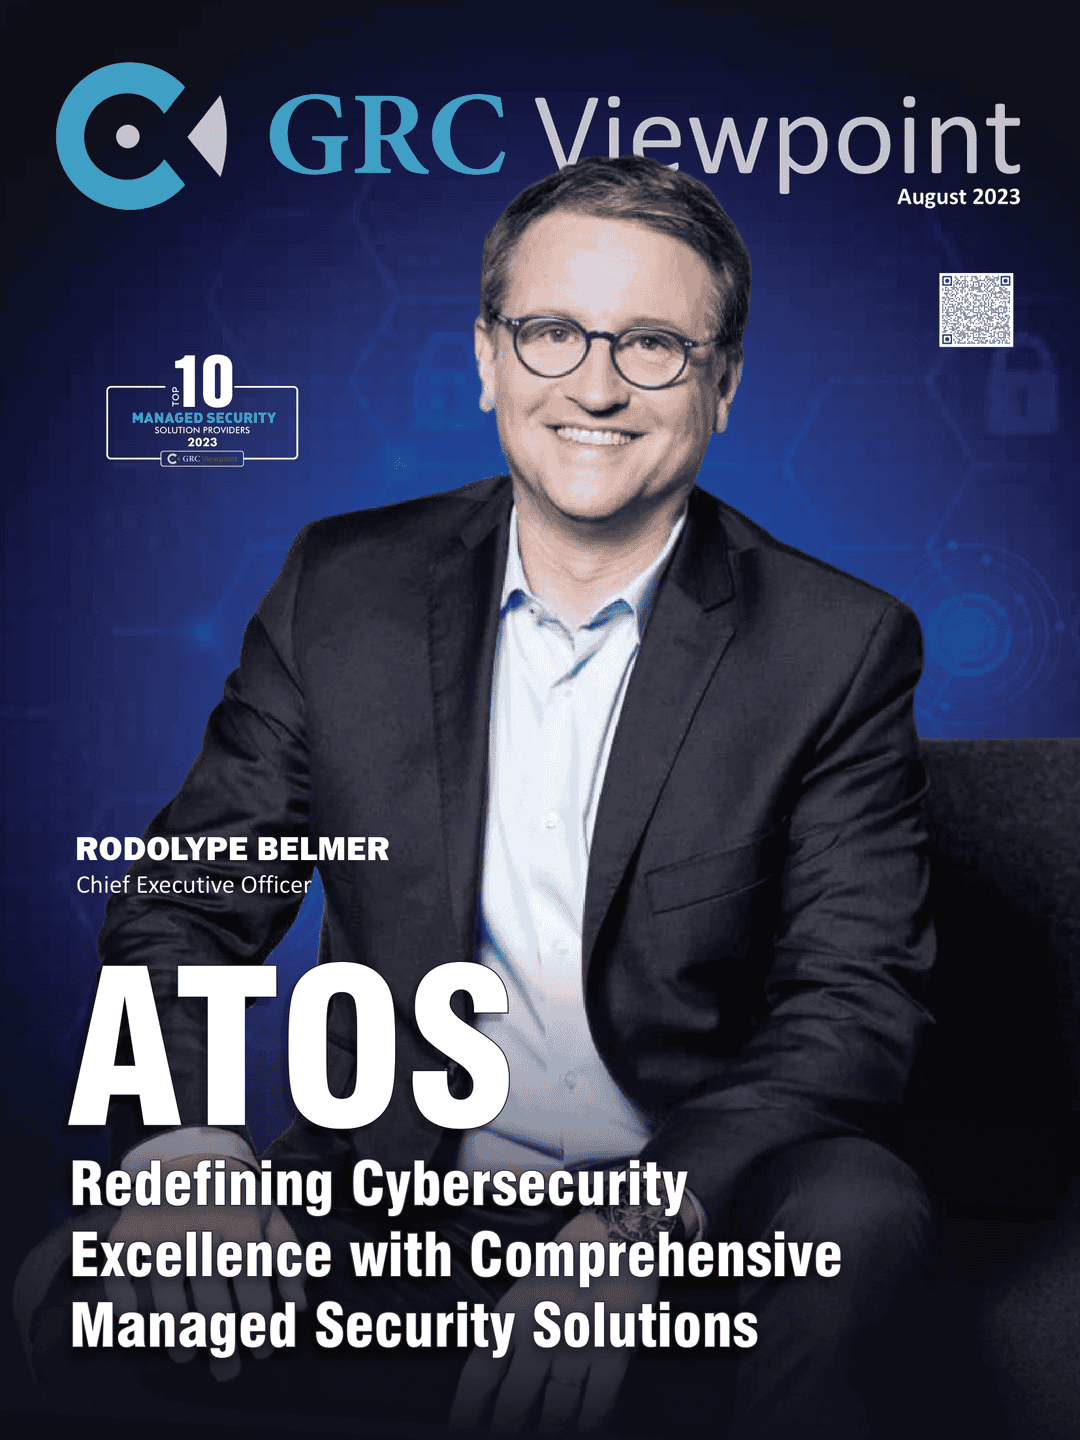 https://www.grcviewpoint.com/magazine/top-10-managed-security-solution-providers-2023/